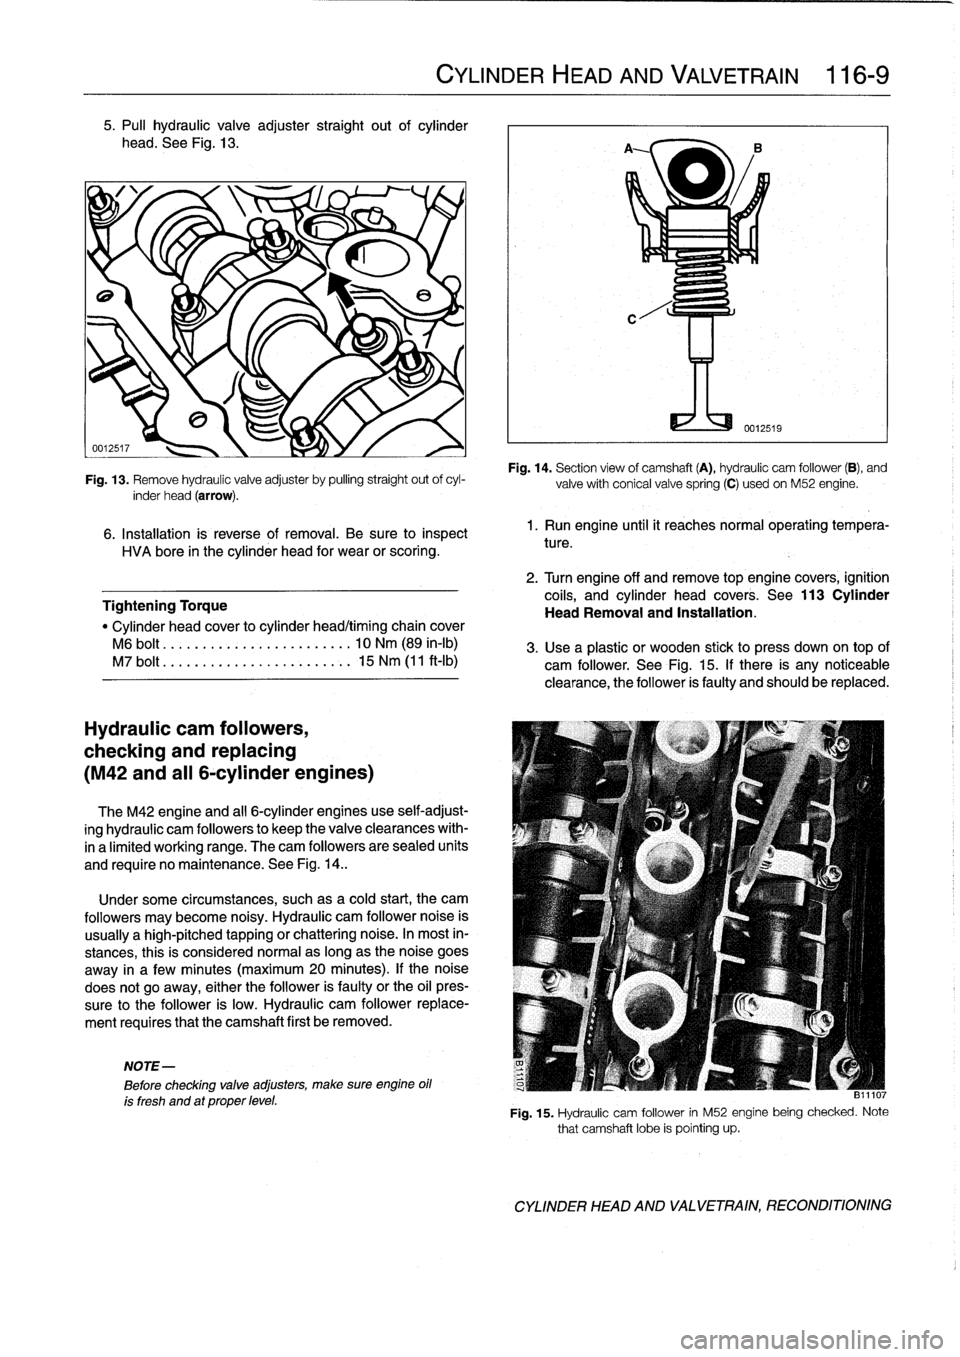 BMW M3 1993 E36 Owners Guide 5
.
Pull
hydraulic
valve
adjuster
straight
out
of
cylinder

head
.
See
Fig
.
13
.

Fig
.
13
.
Remove
hydraulic
valve
adjuster
by
pulling
straight
out
ofcyl-
inder
head
(arrow)
.

6
.
Installation
is
r